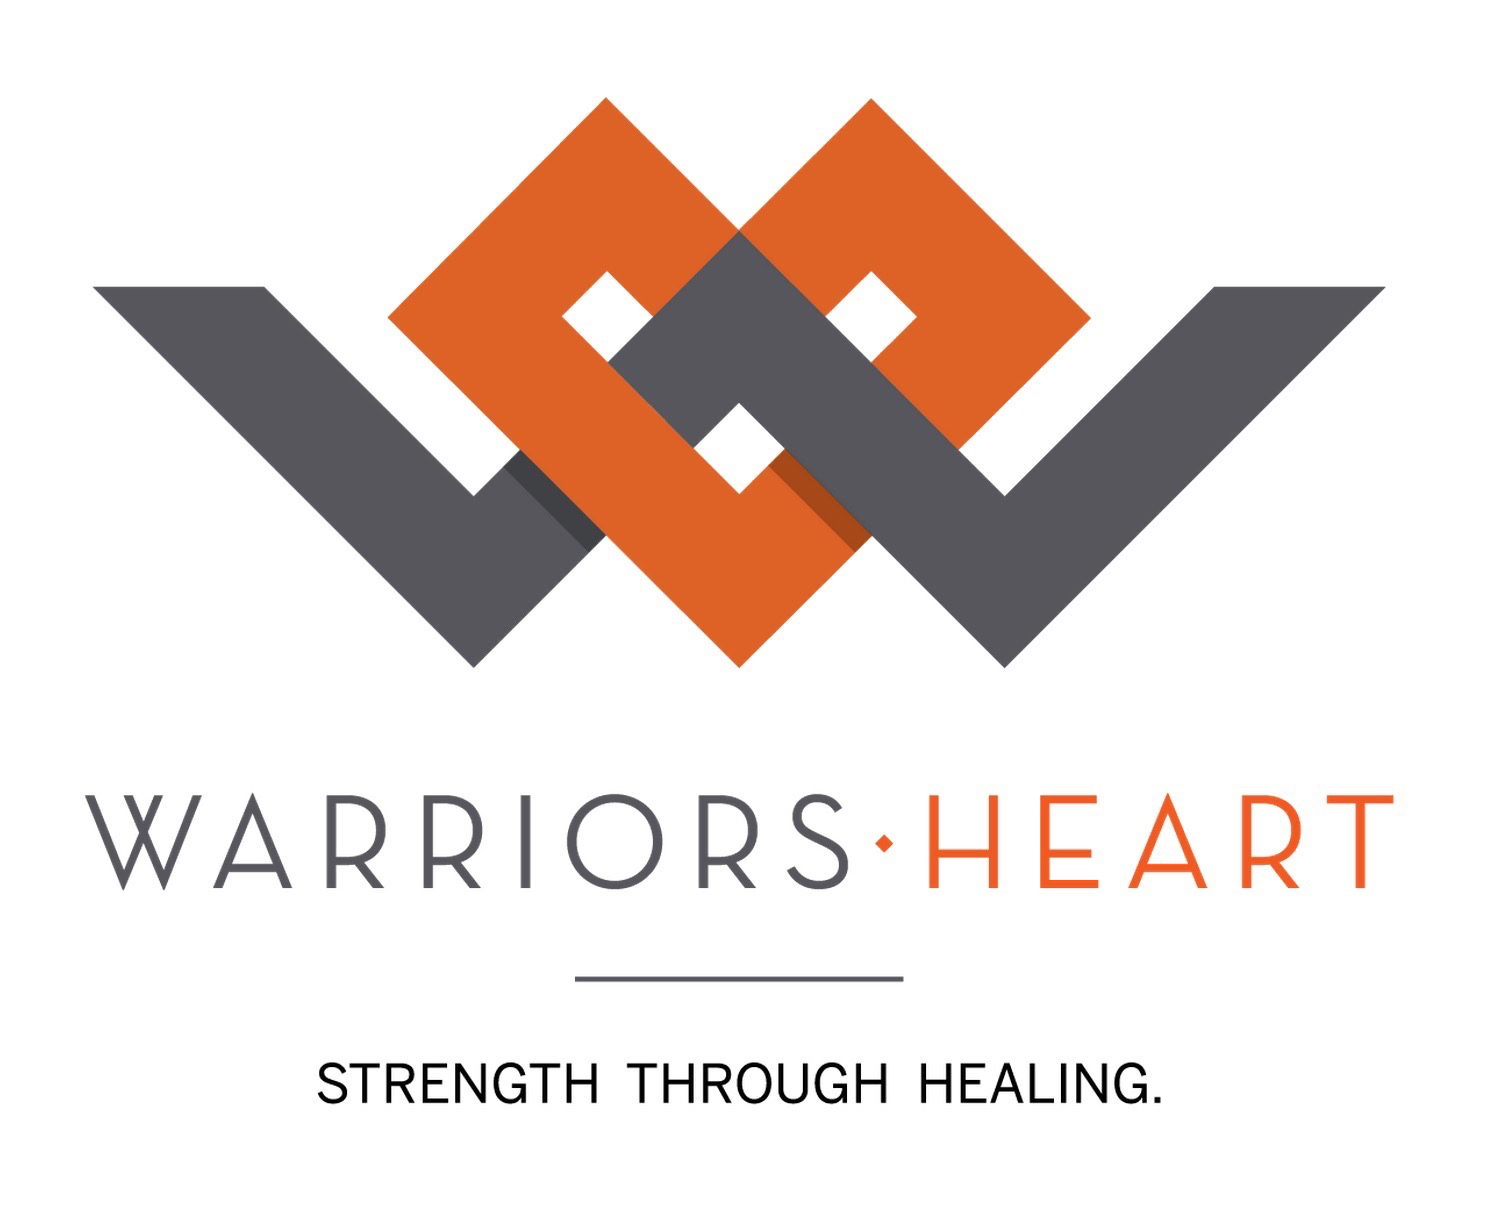 Warriors Heart is the first and ONLY private and accredited treatment program in the U.S. exclusively for “warriors” (active duty military, veterans, first responders and EMTs/paramedics) on a ranch.